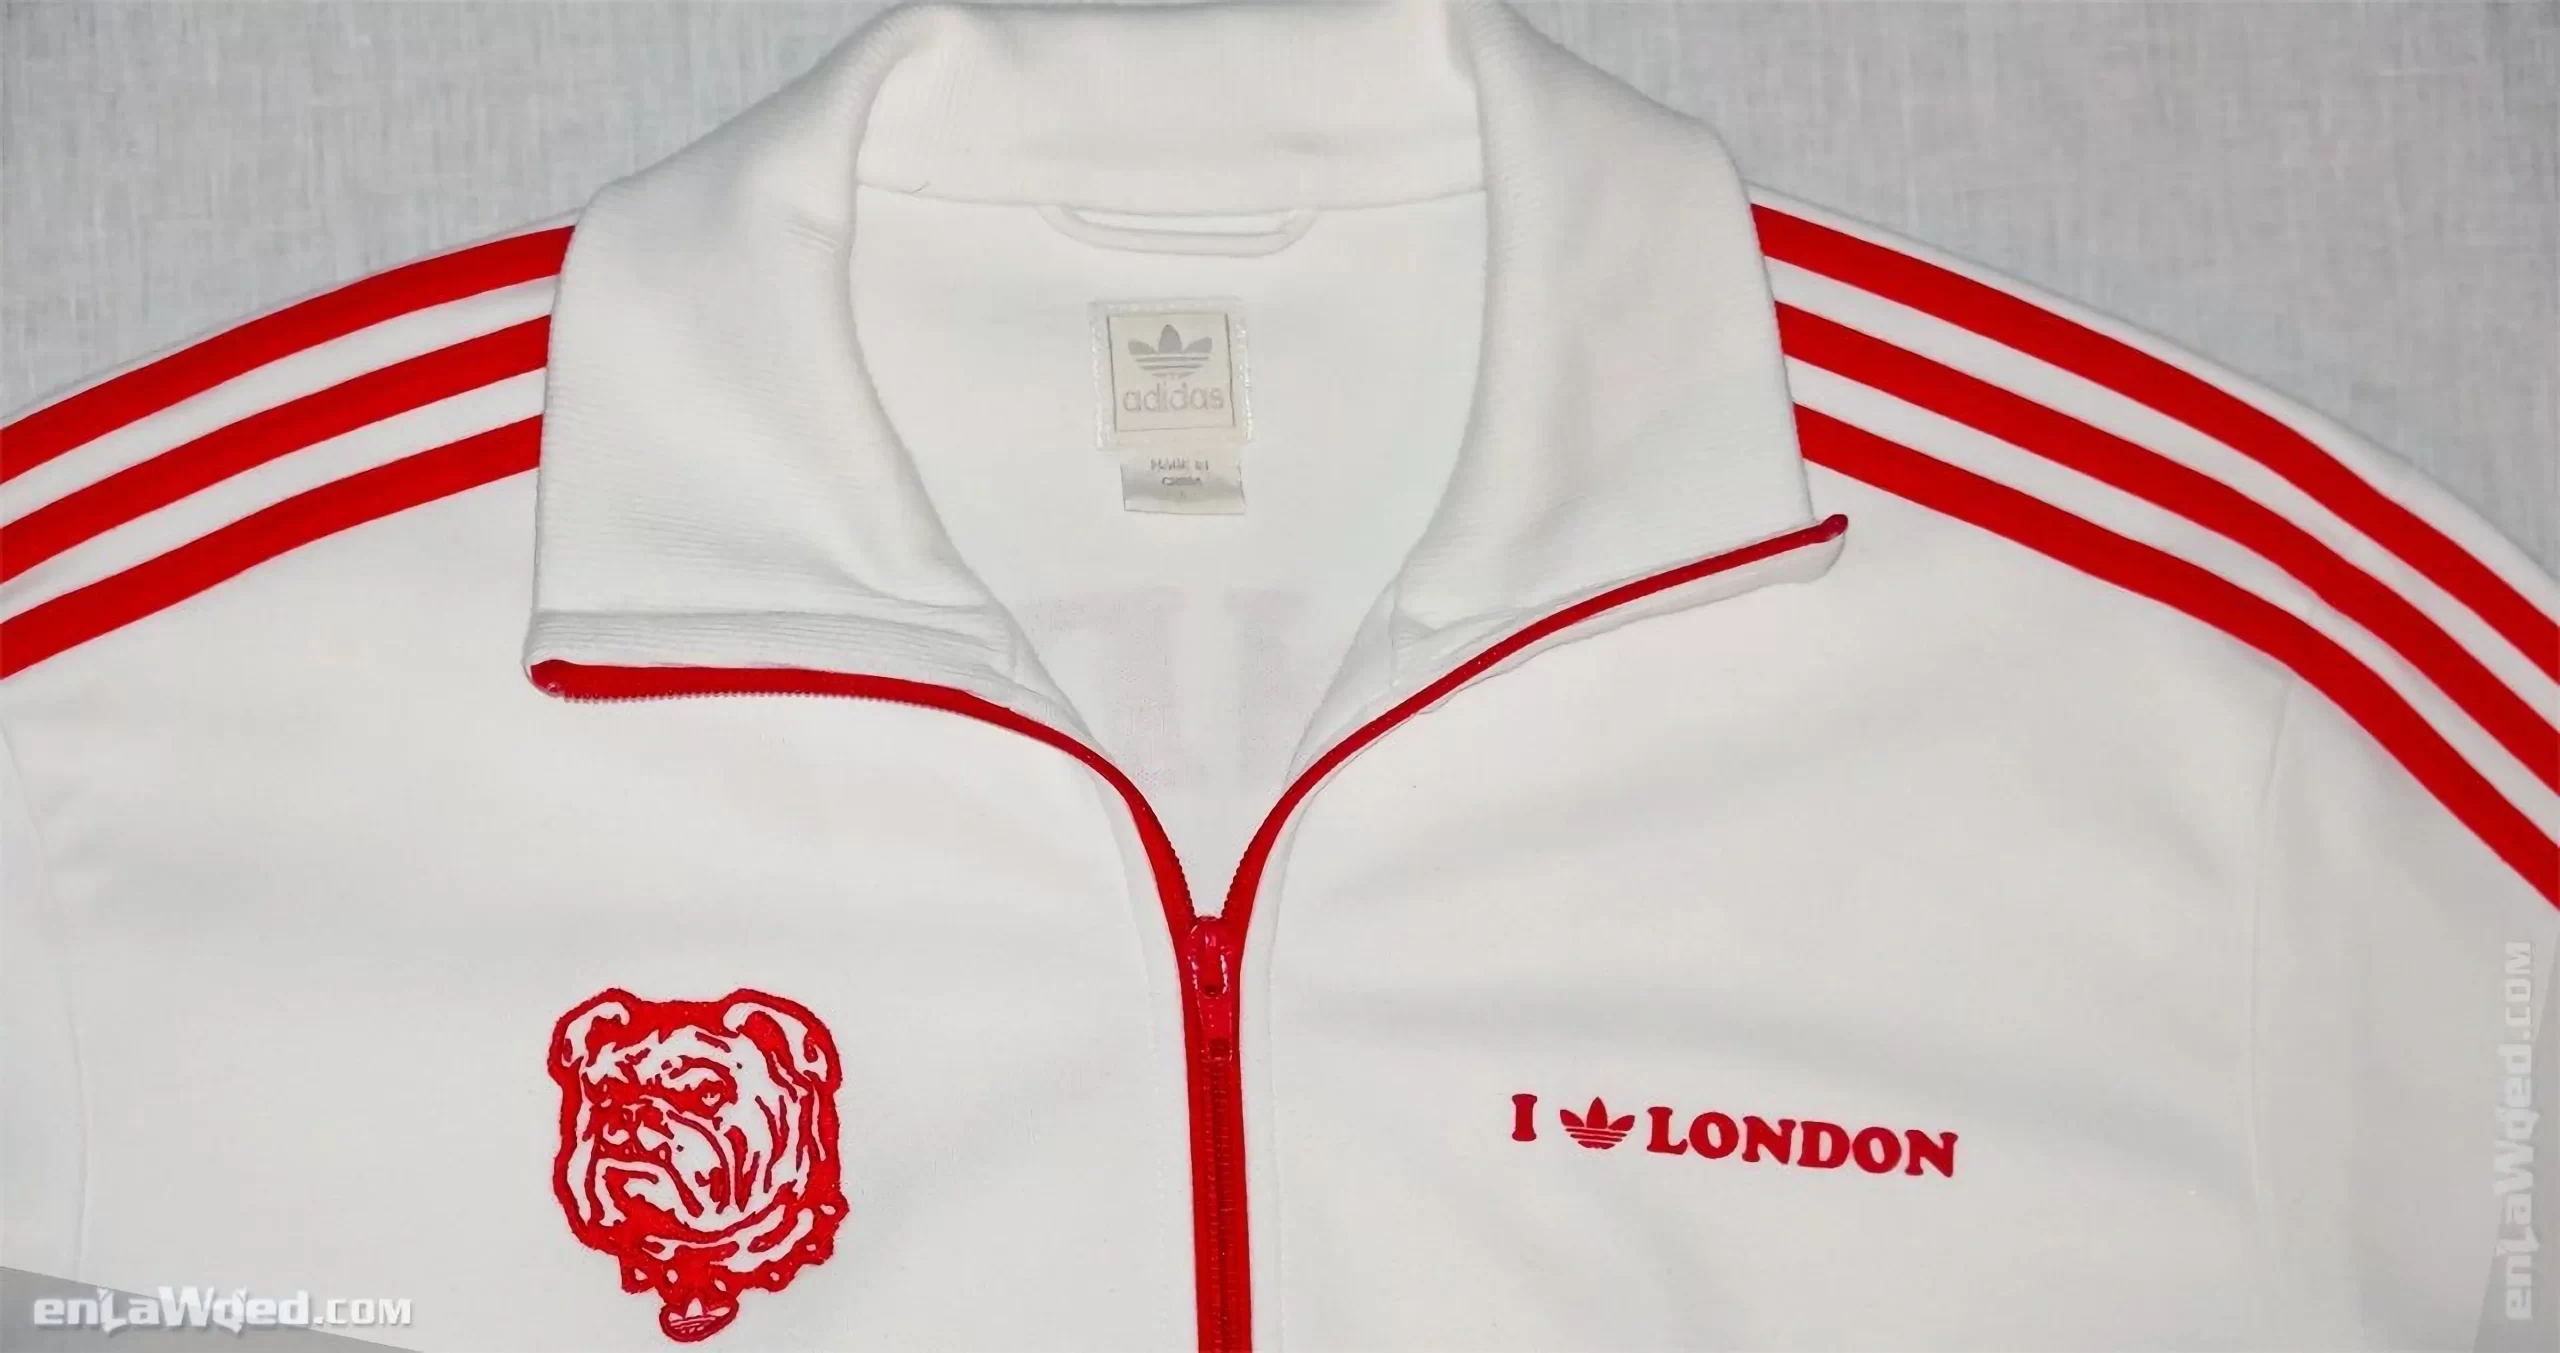 3rd interior view of the Adidas Originals London Track Top